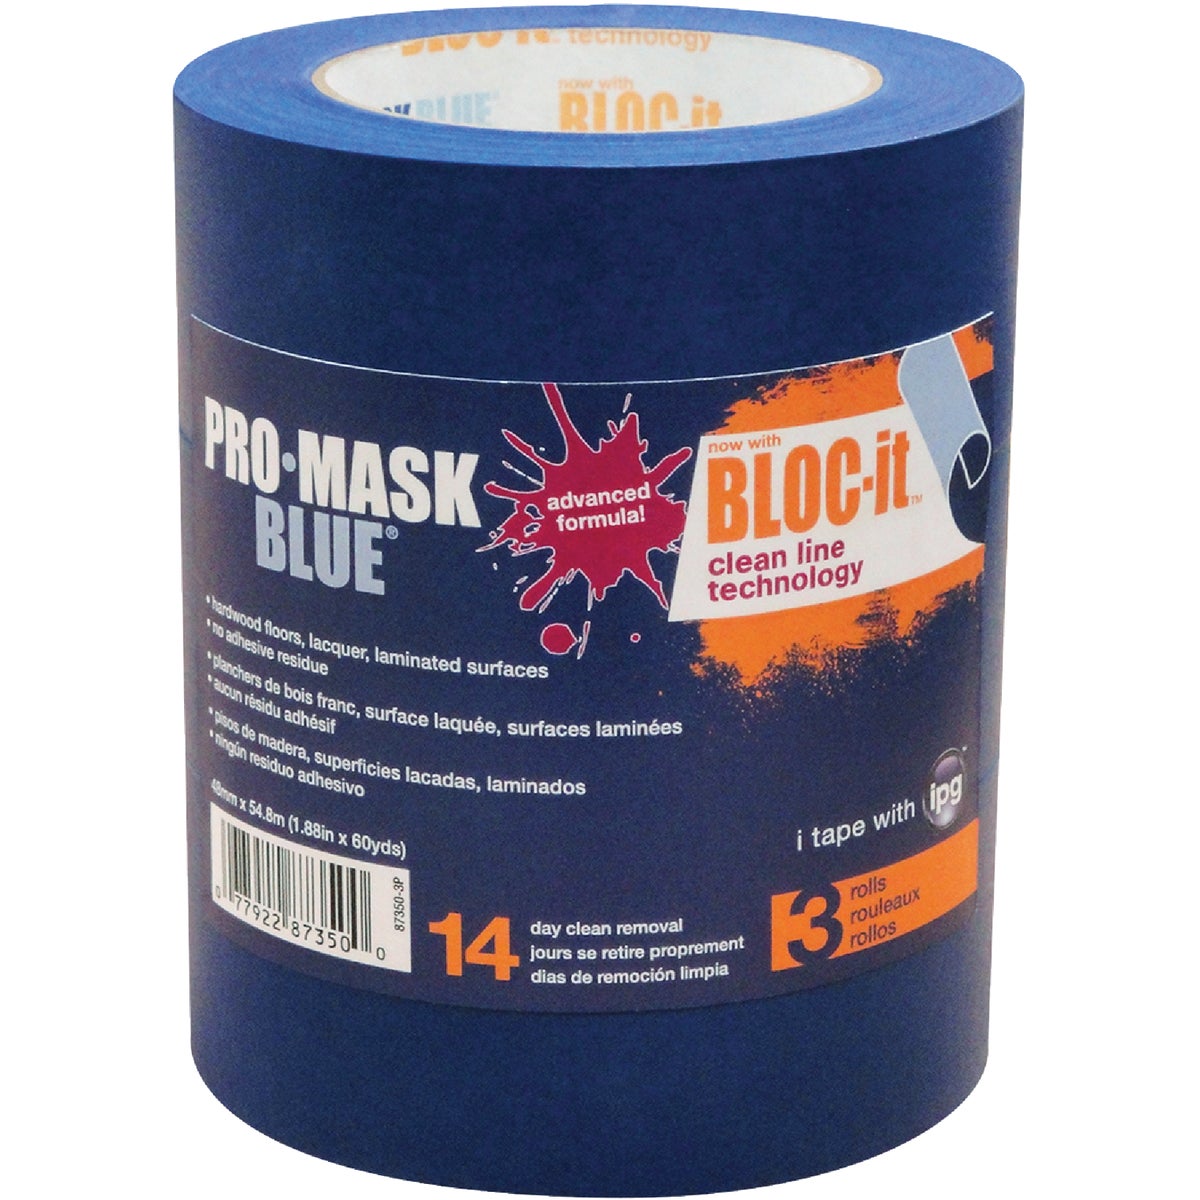 IPG ProMask Blue 1.88 In. x 60 Yd. Bloc-It Masking Tape (3-Pack)